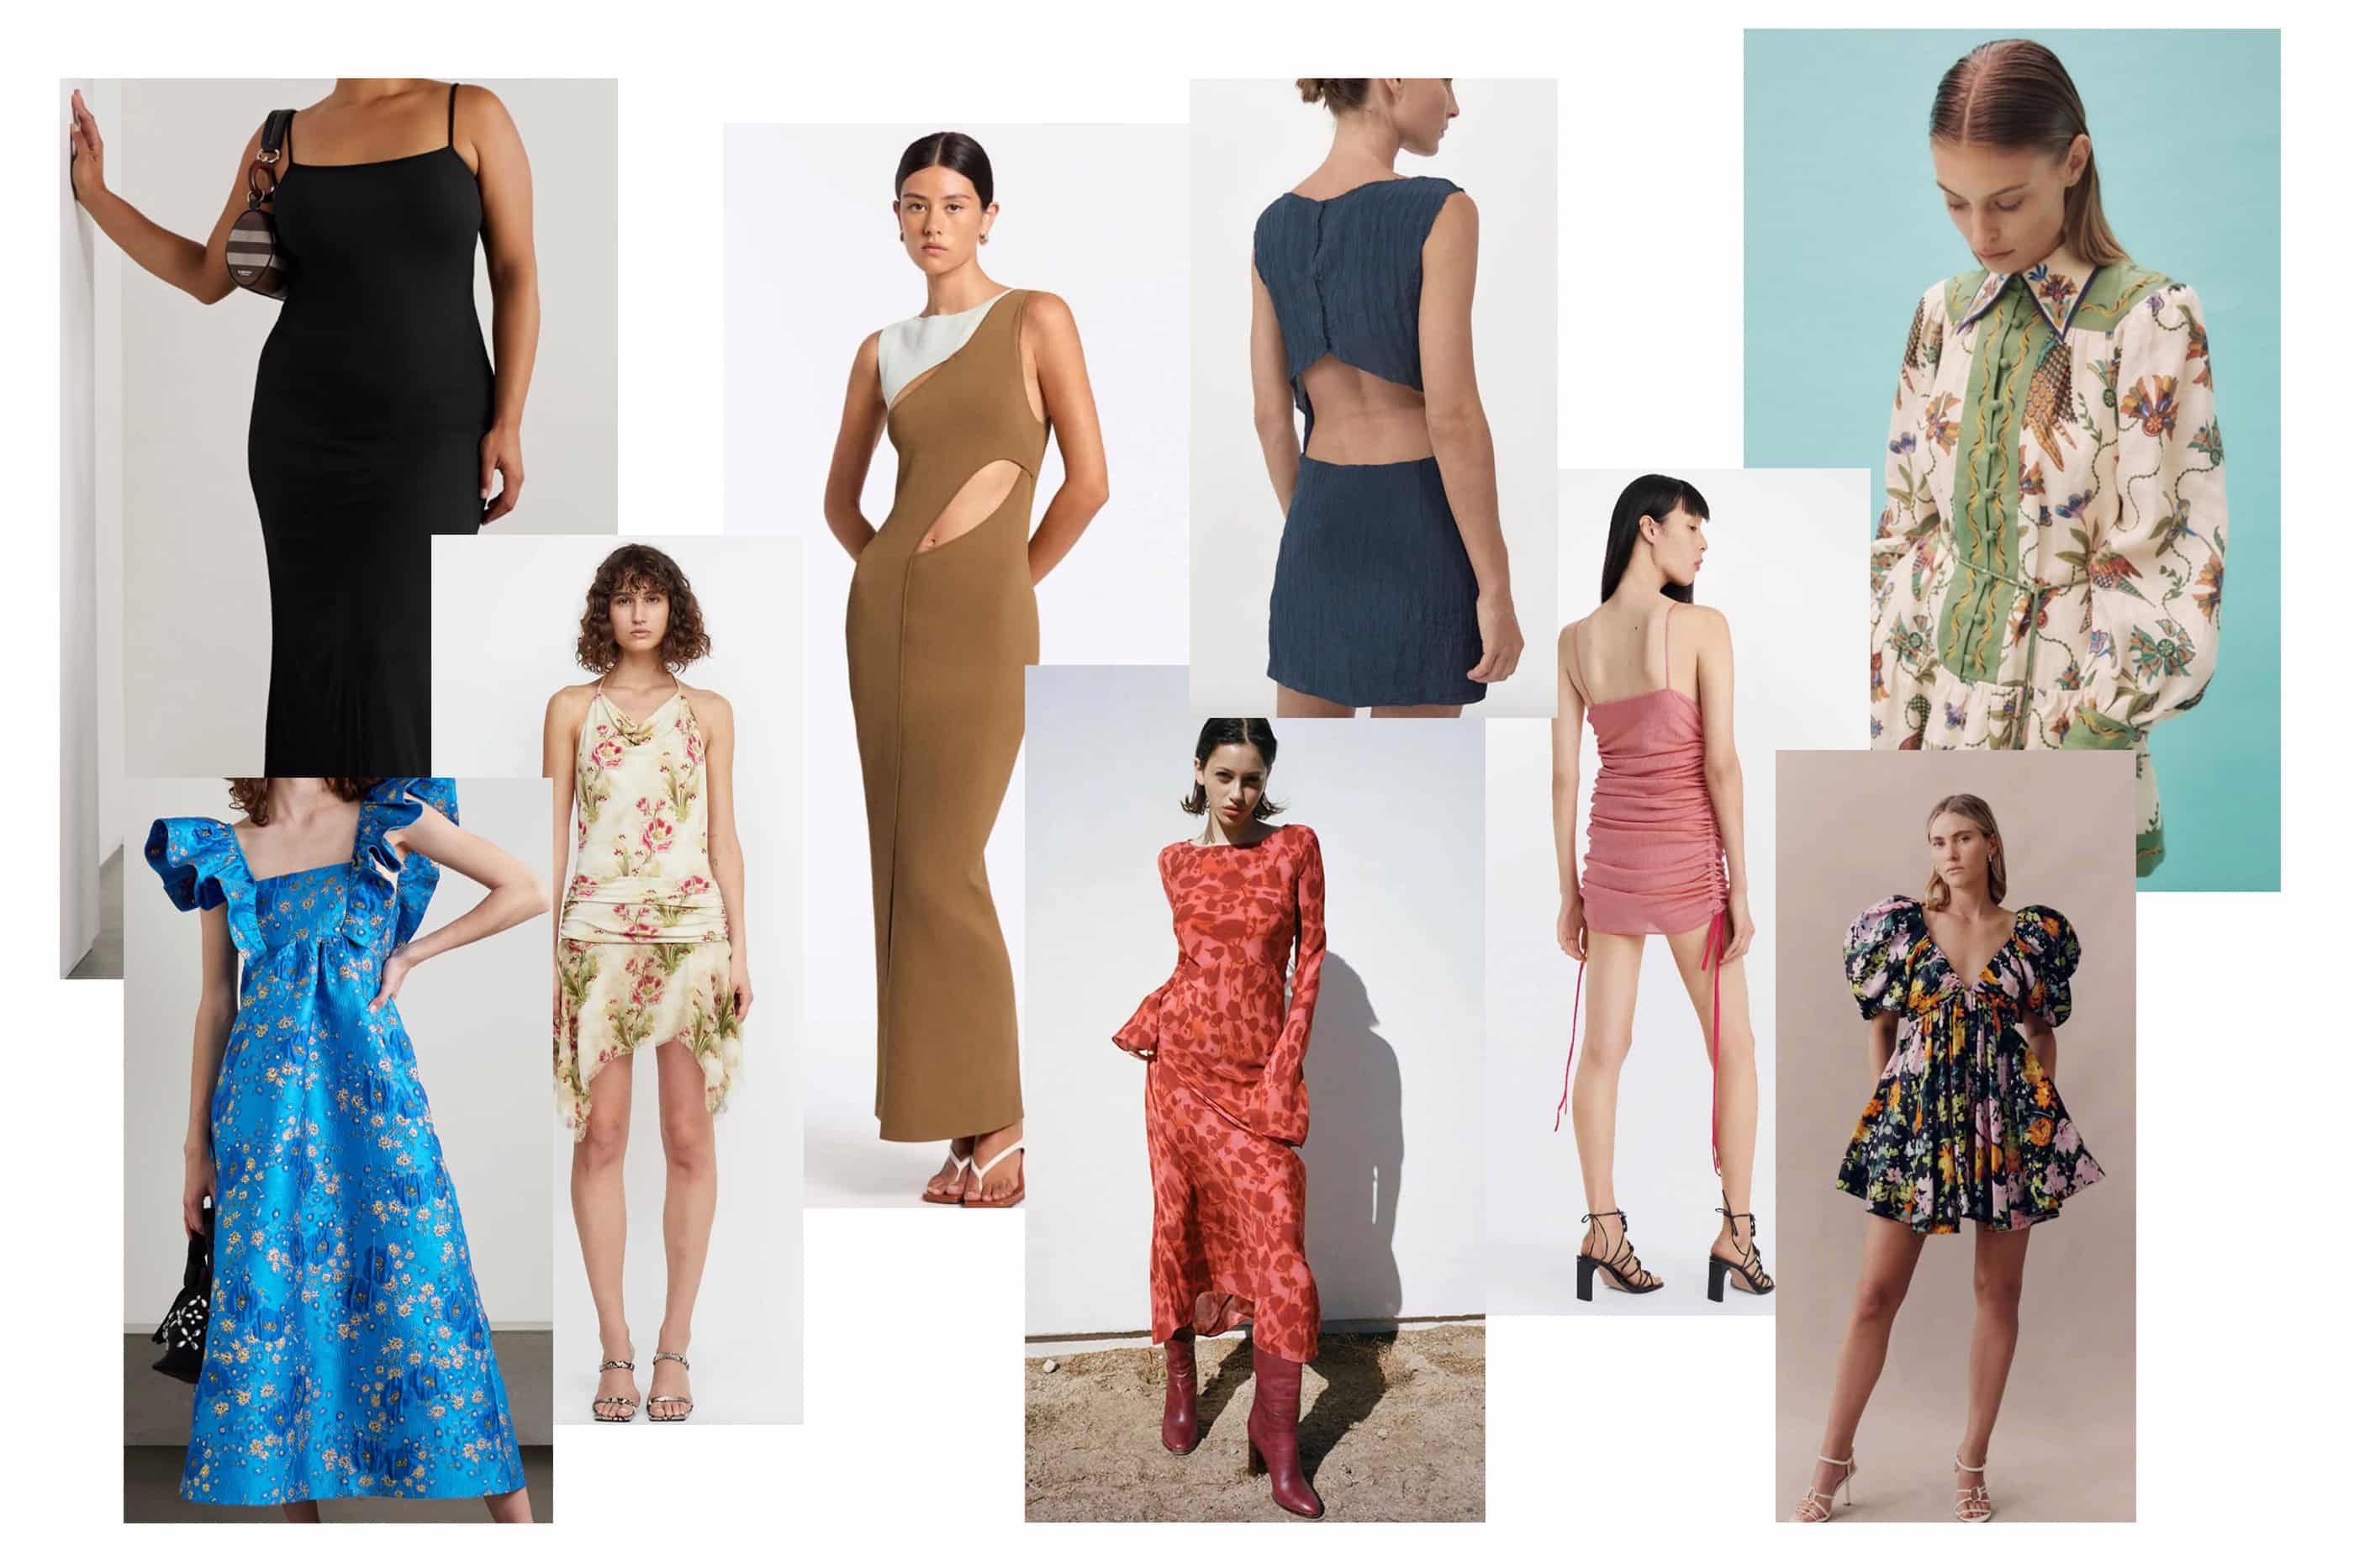 RUSSH Loves: the perfect day-to-evening dresses for the warmer weather